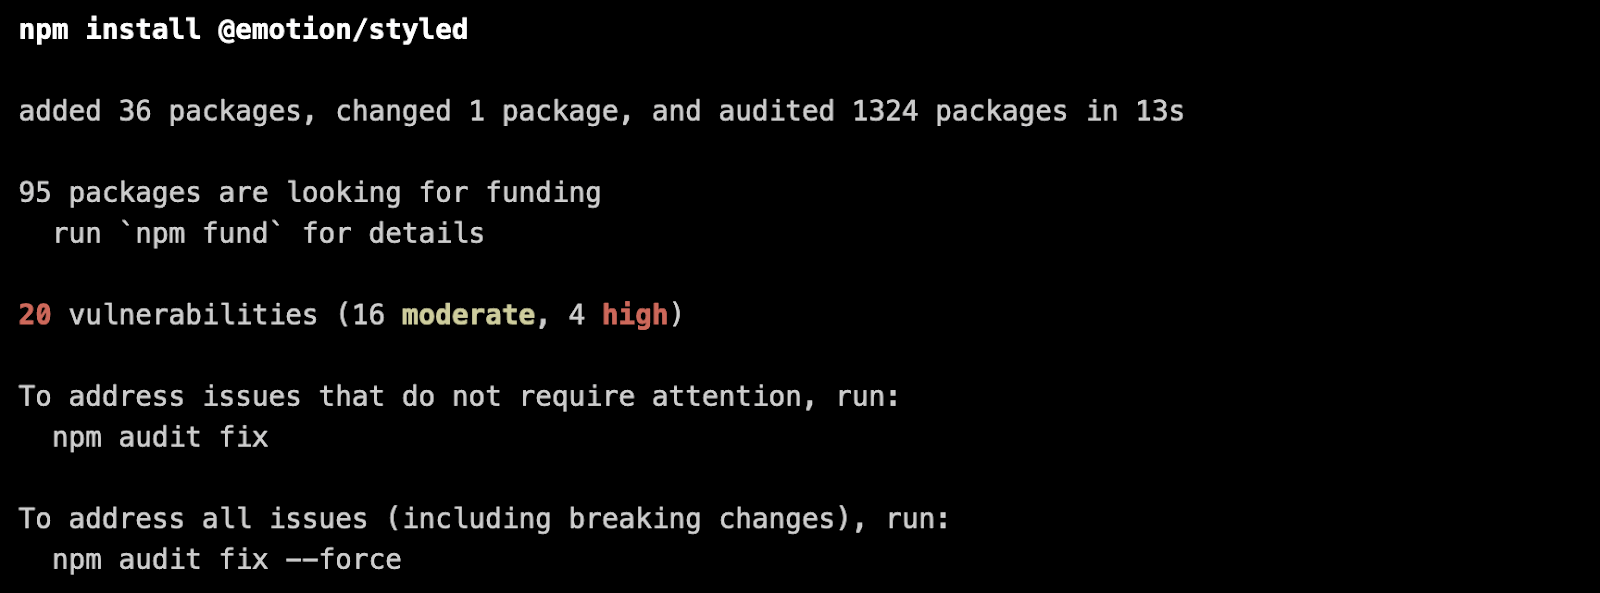 run this command npm install @emotion/styled